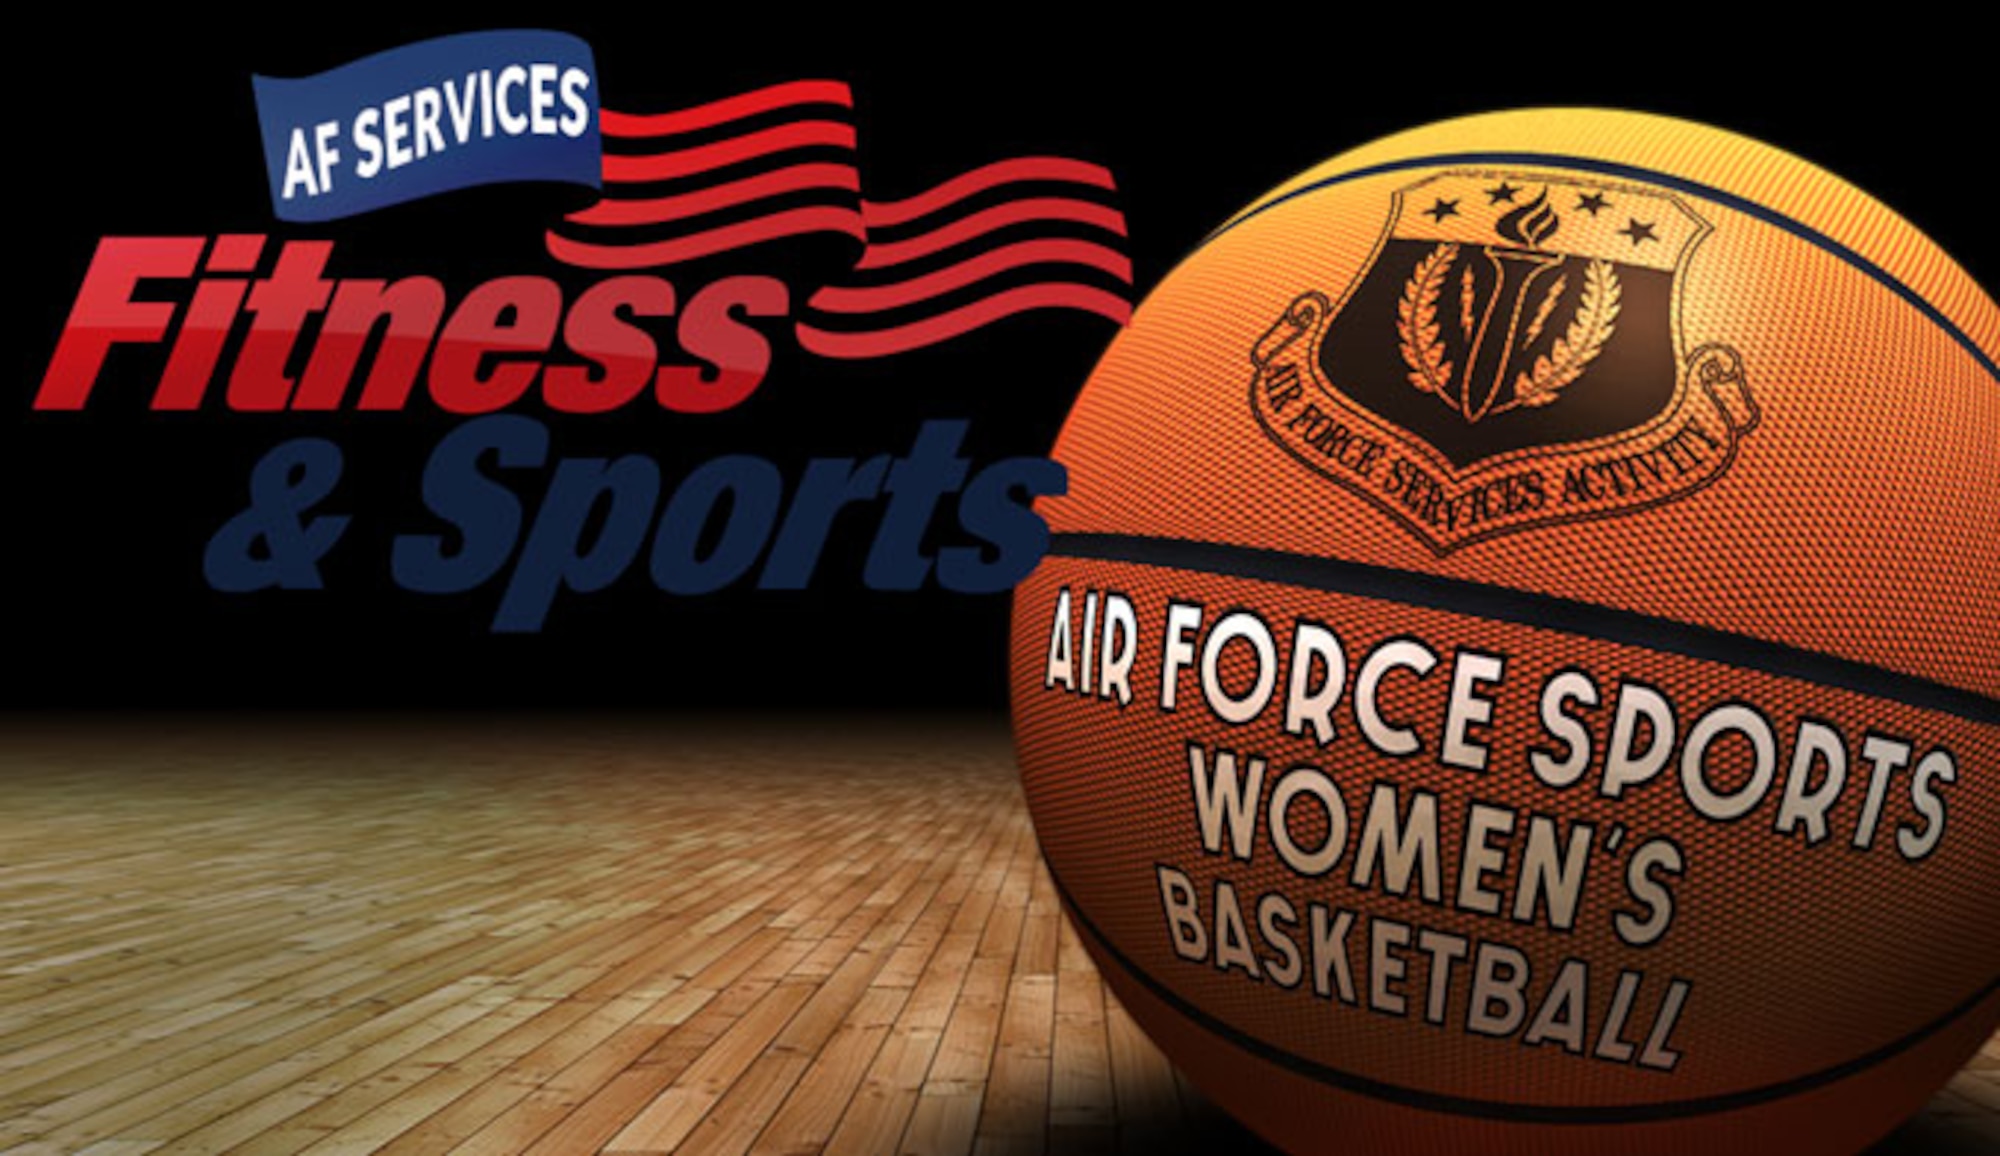 Graphic for Air Force Sports Women's Basketball (U.S. Air Force graphic by Greg Hand)